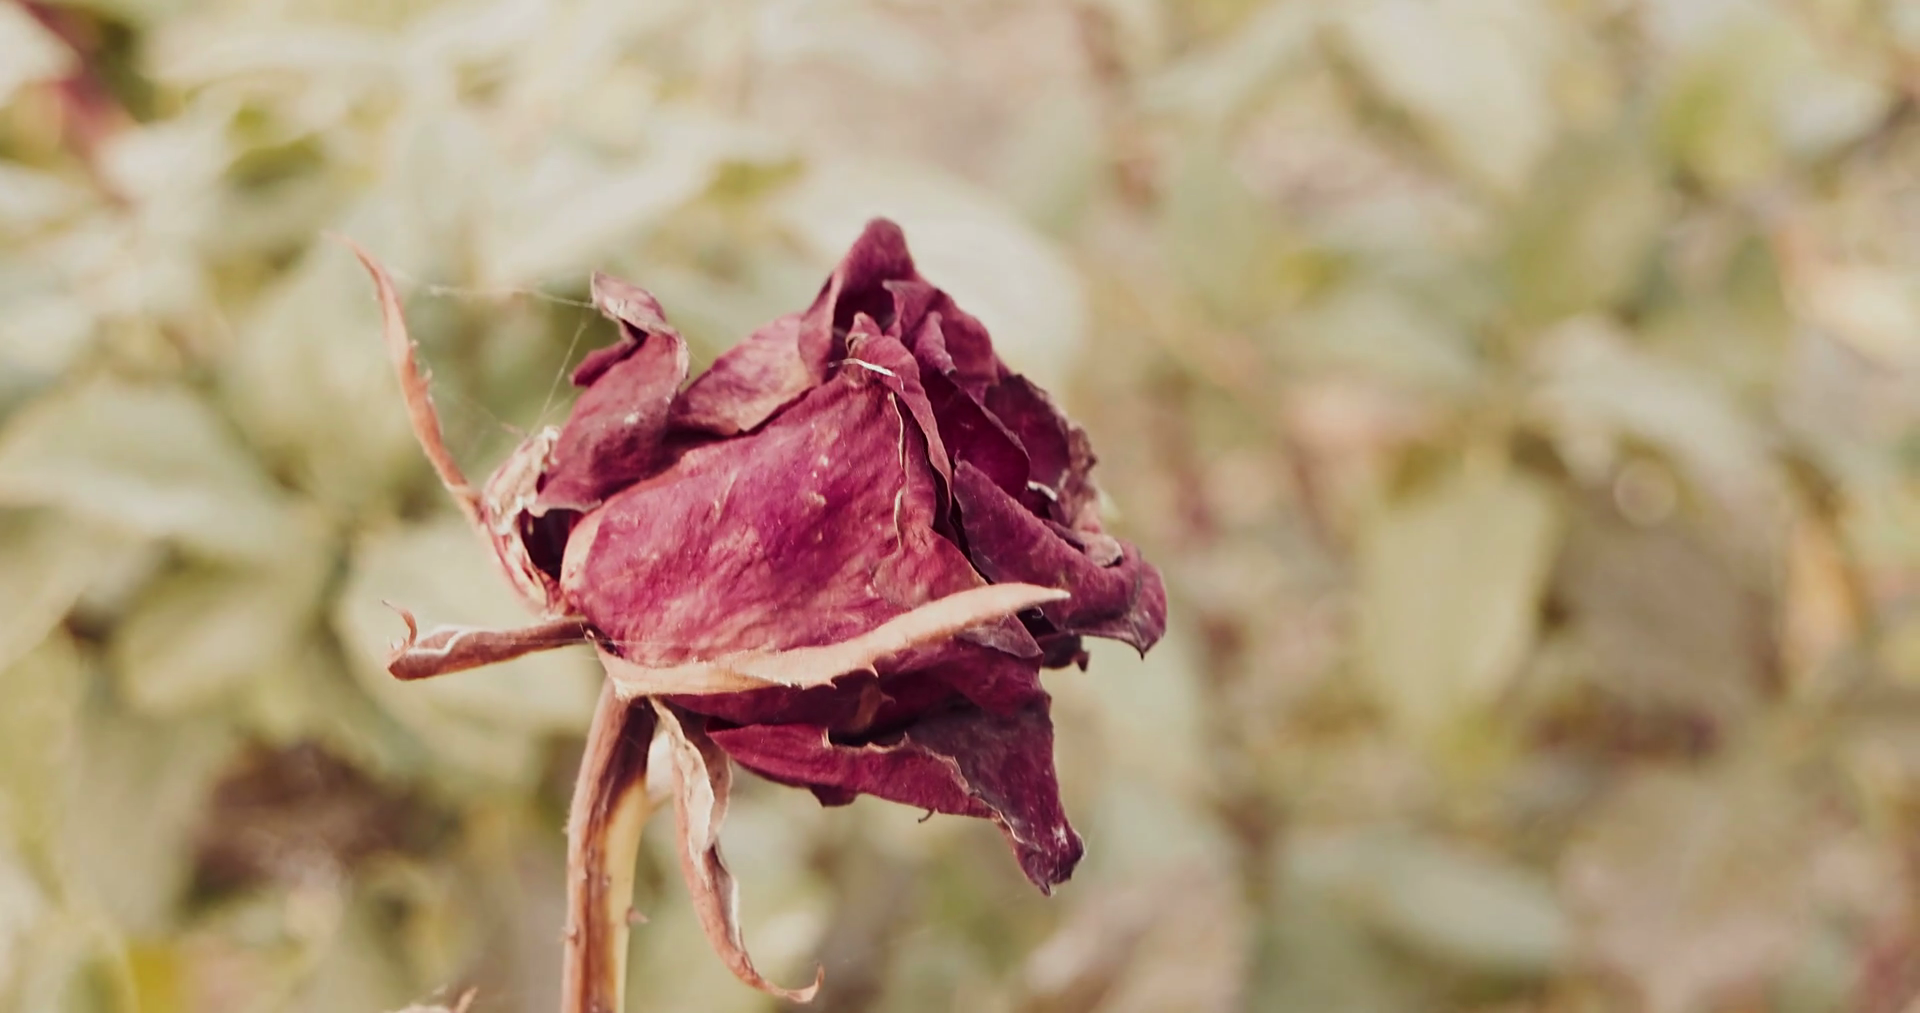 Dying flower photo